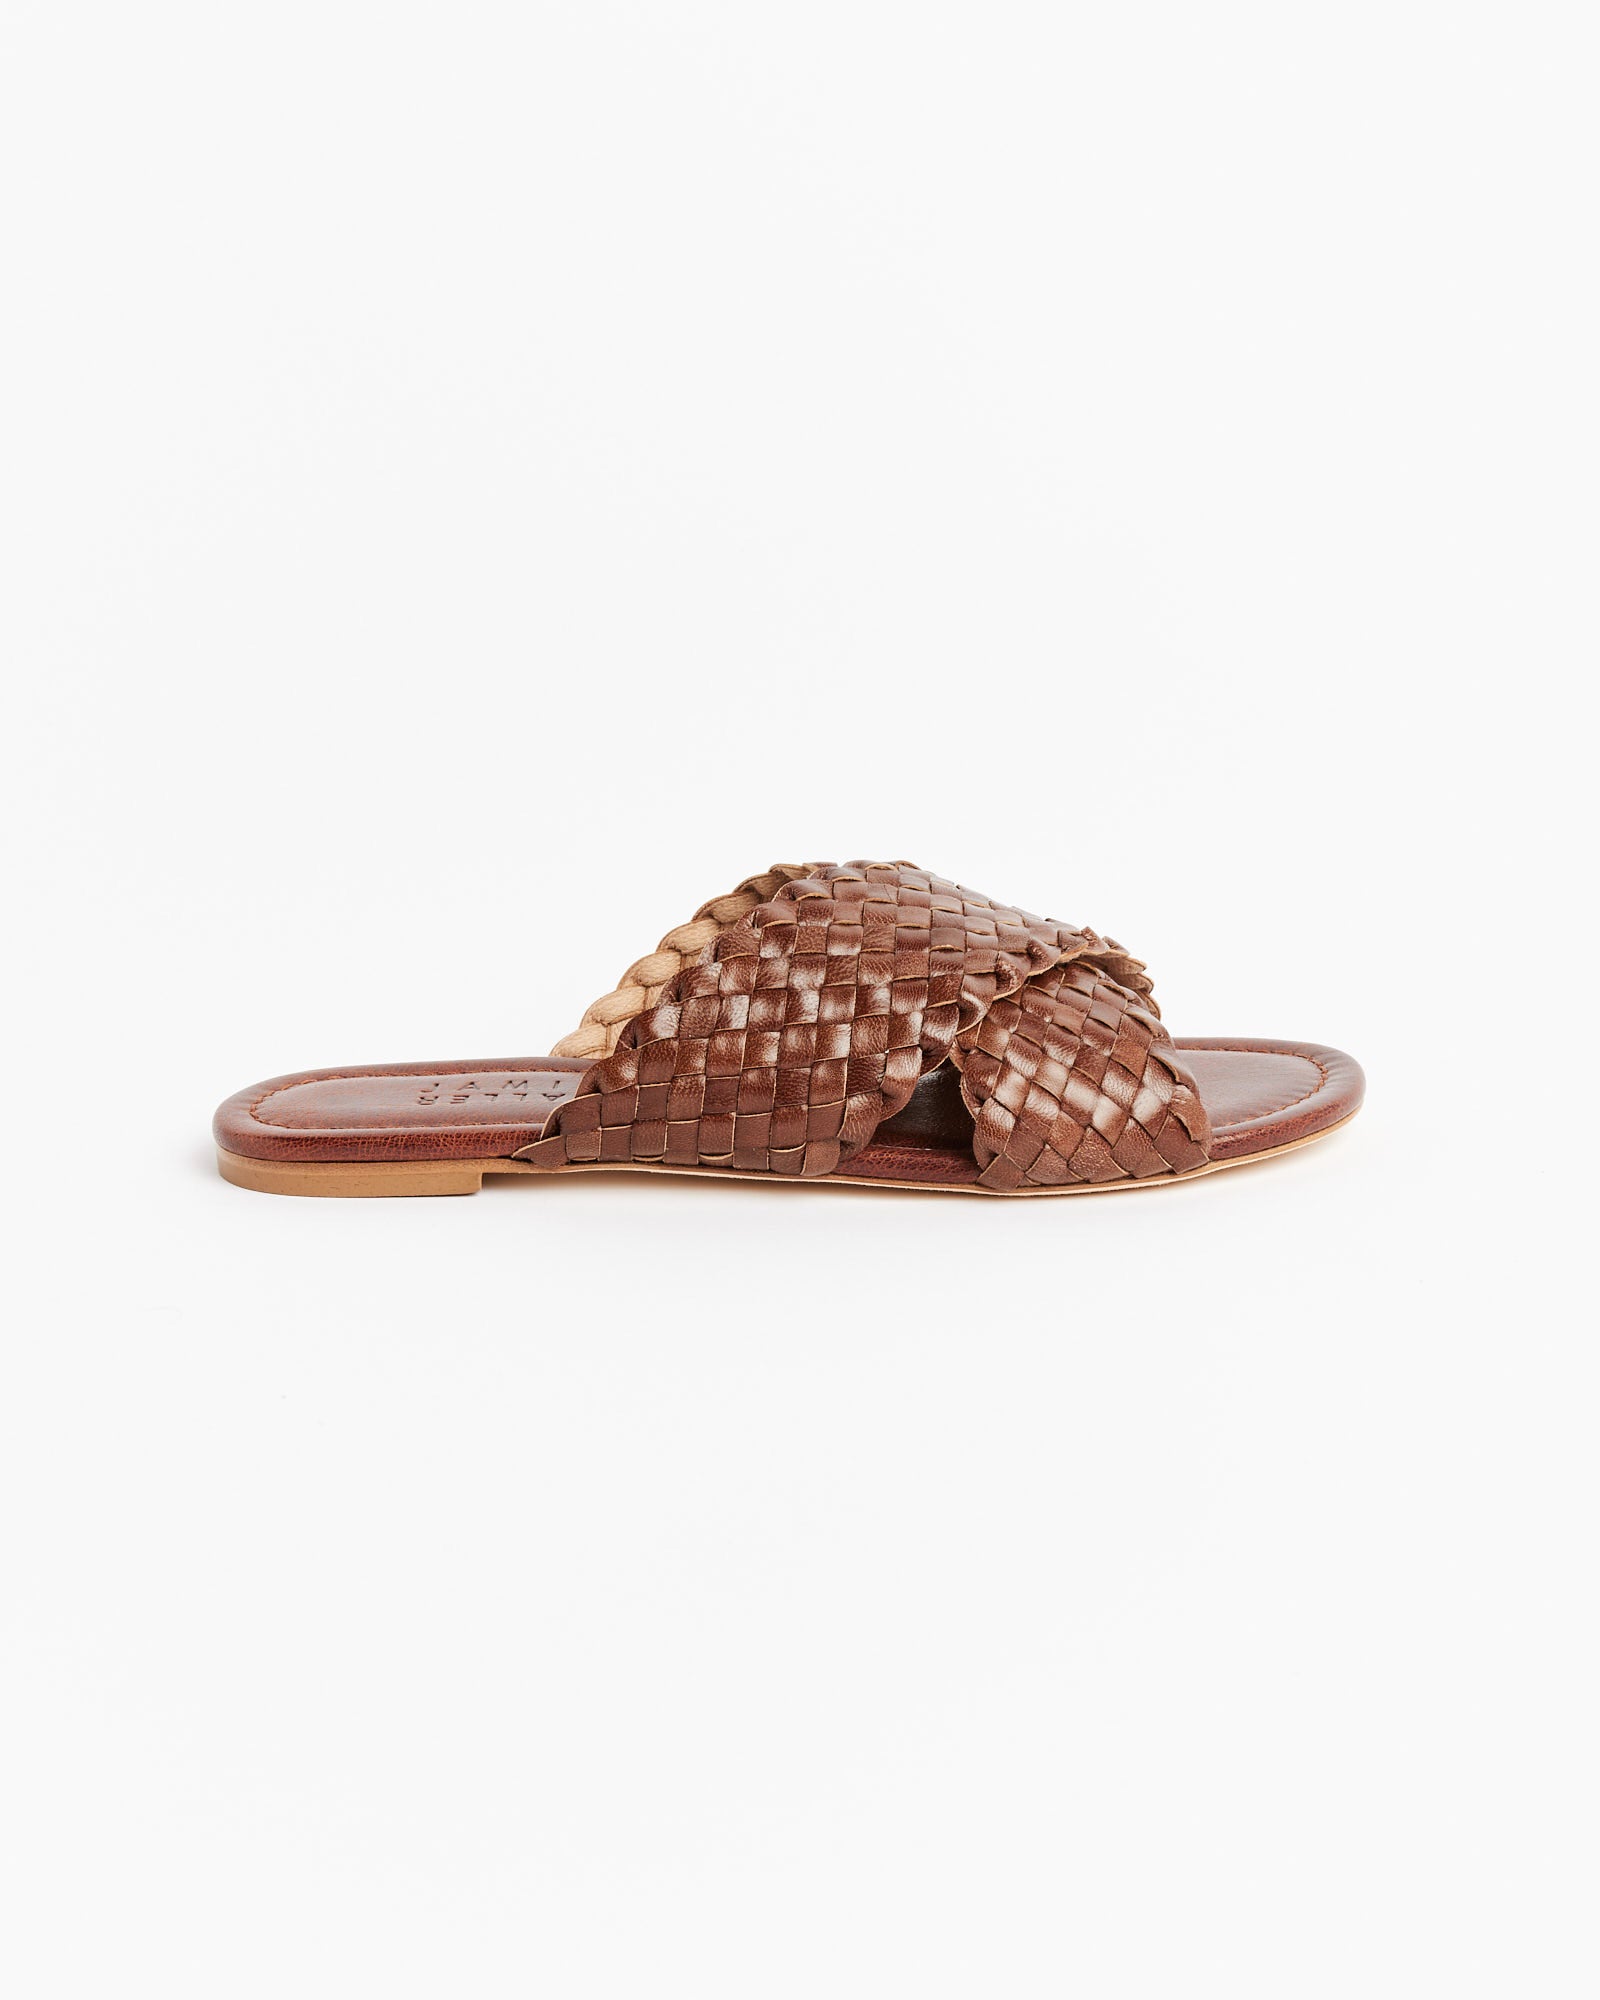 Woven Strap Slide in Brown Braided